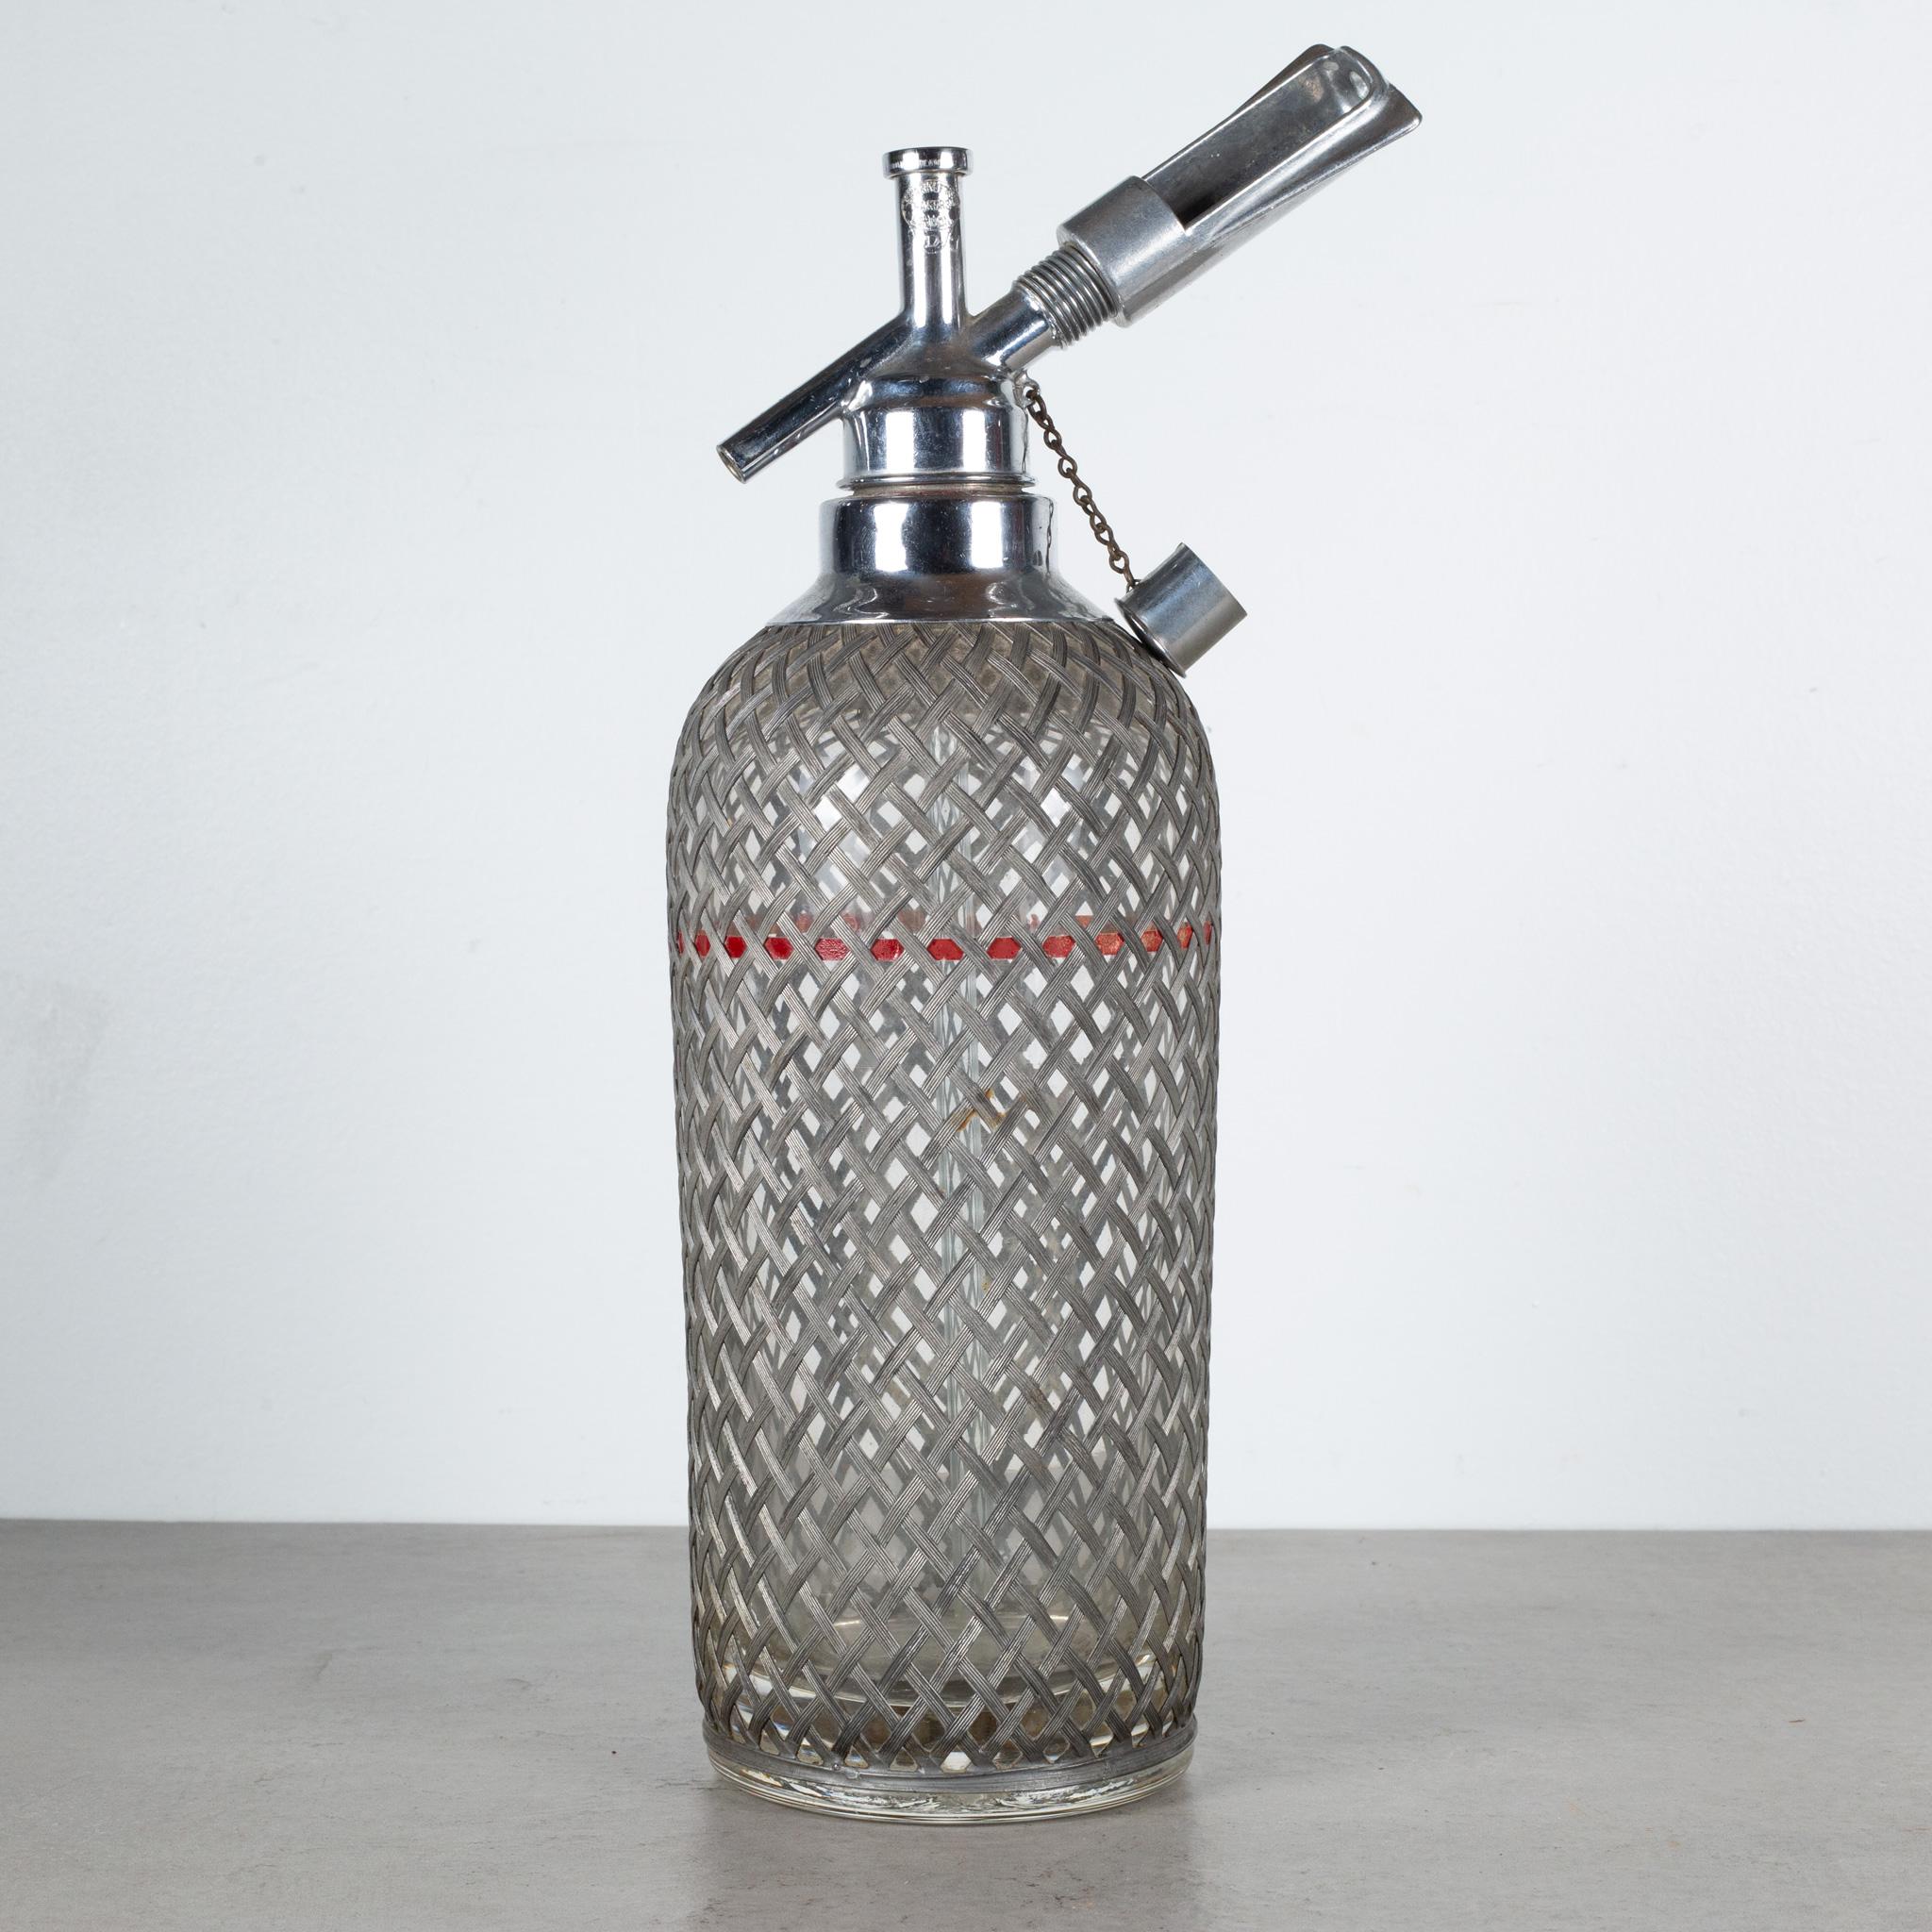 ABOUT

An original Art Deco Sparklets seltzer bottle. The thick glass bottle has a wire mesh cover sleeve, chrome mechanisms on top, a red fill line and etched 